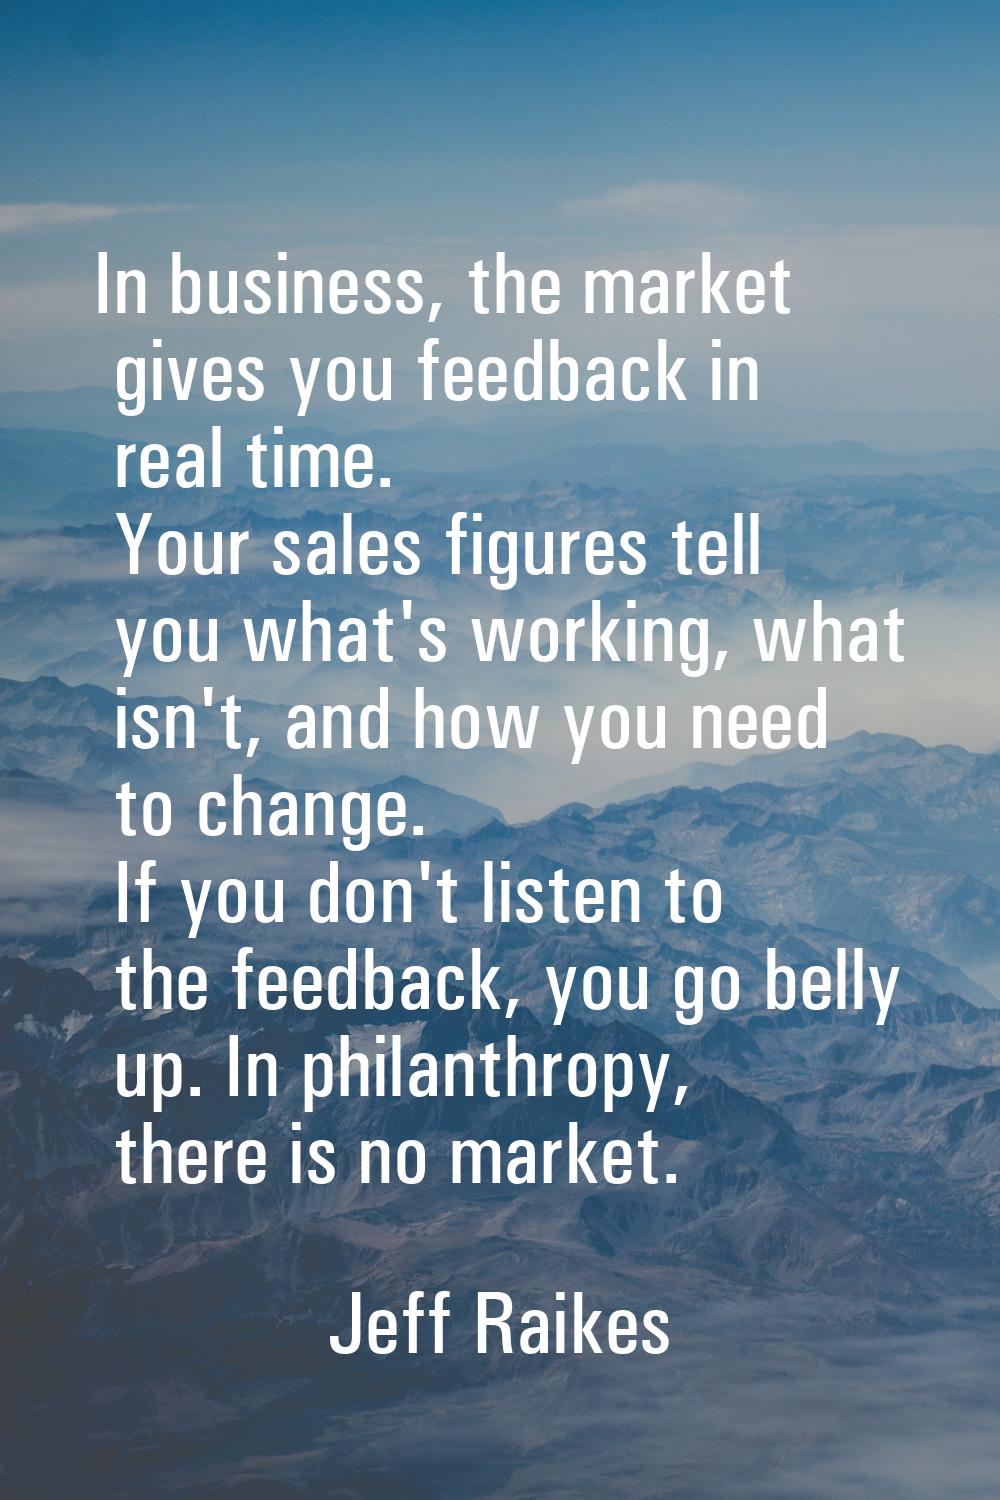 In business, the market gives you feedback in real time. Your sales figures tell you what's working